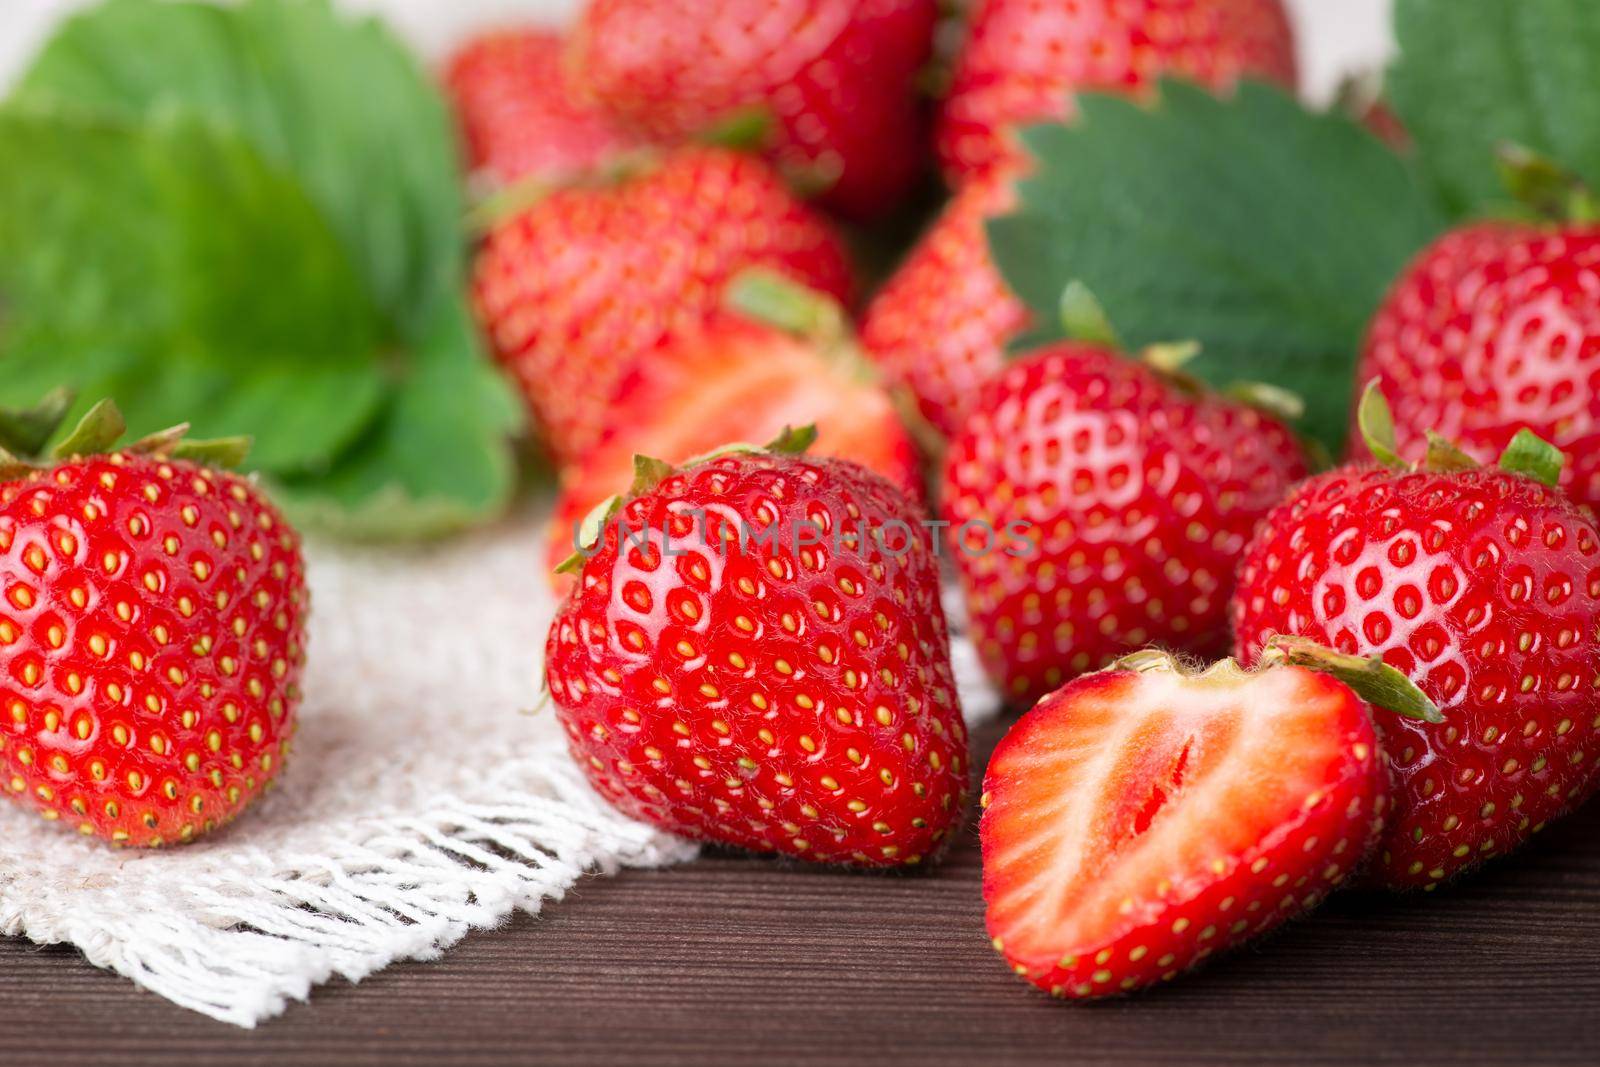 Tasty fresh strawberries on a white linen kitchen towel with some leaves in the background